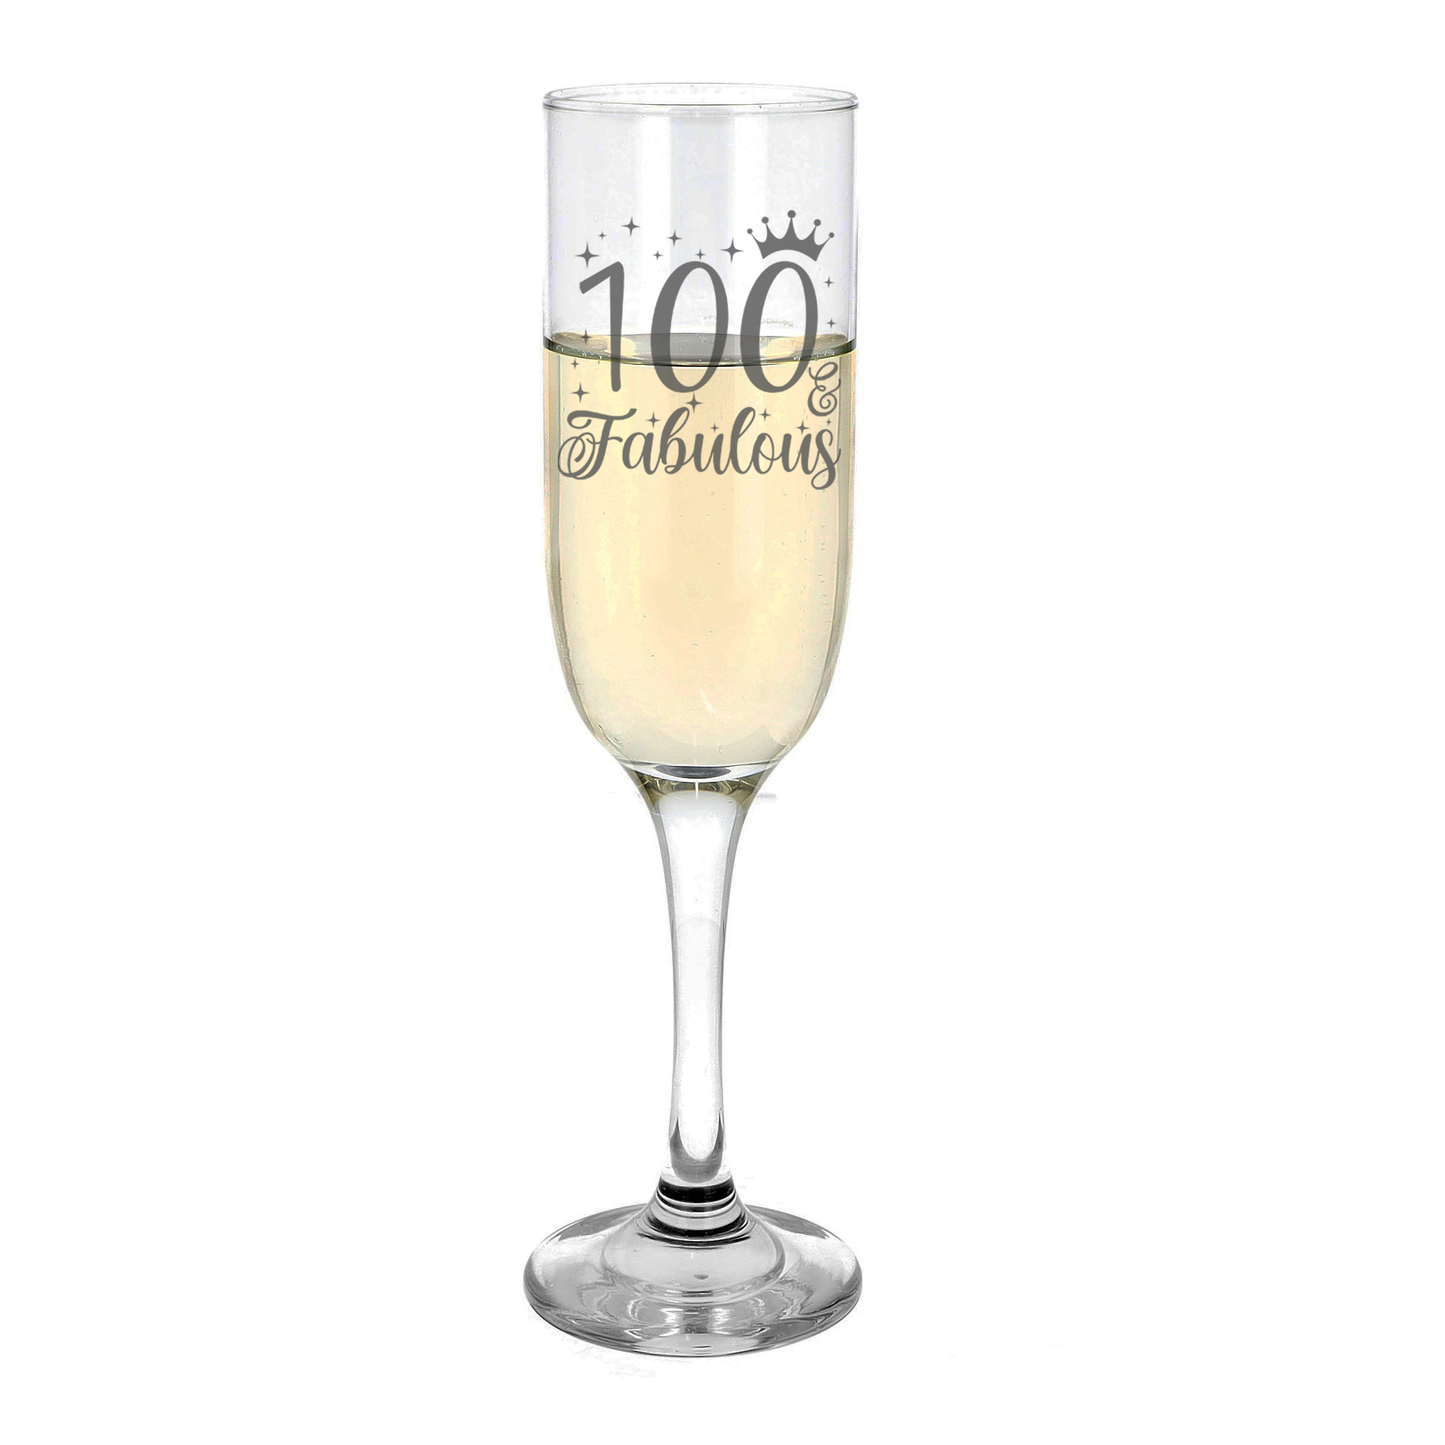 100 & Fabulous Engraved Champagne Glass and/or Coaster Set  - Always Looking Good -   